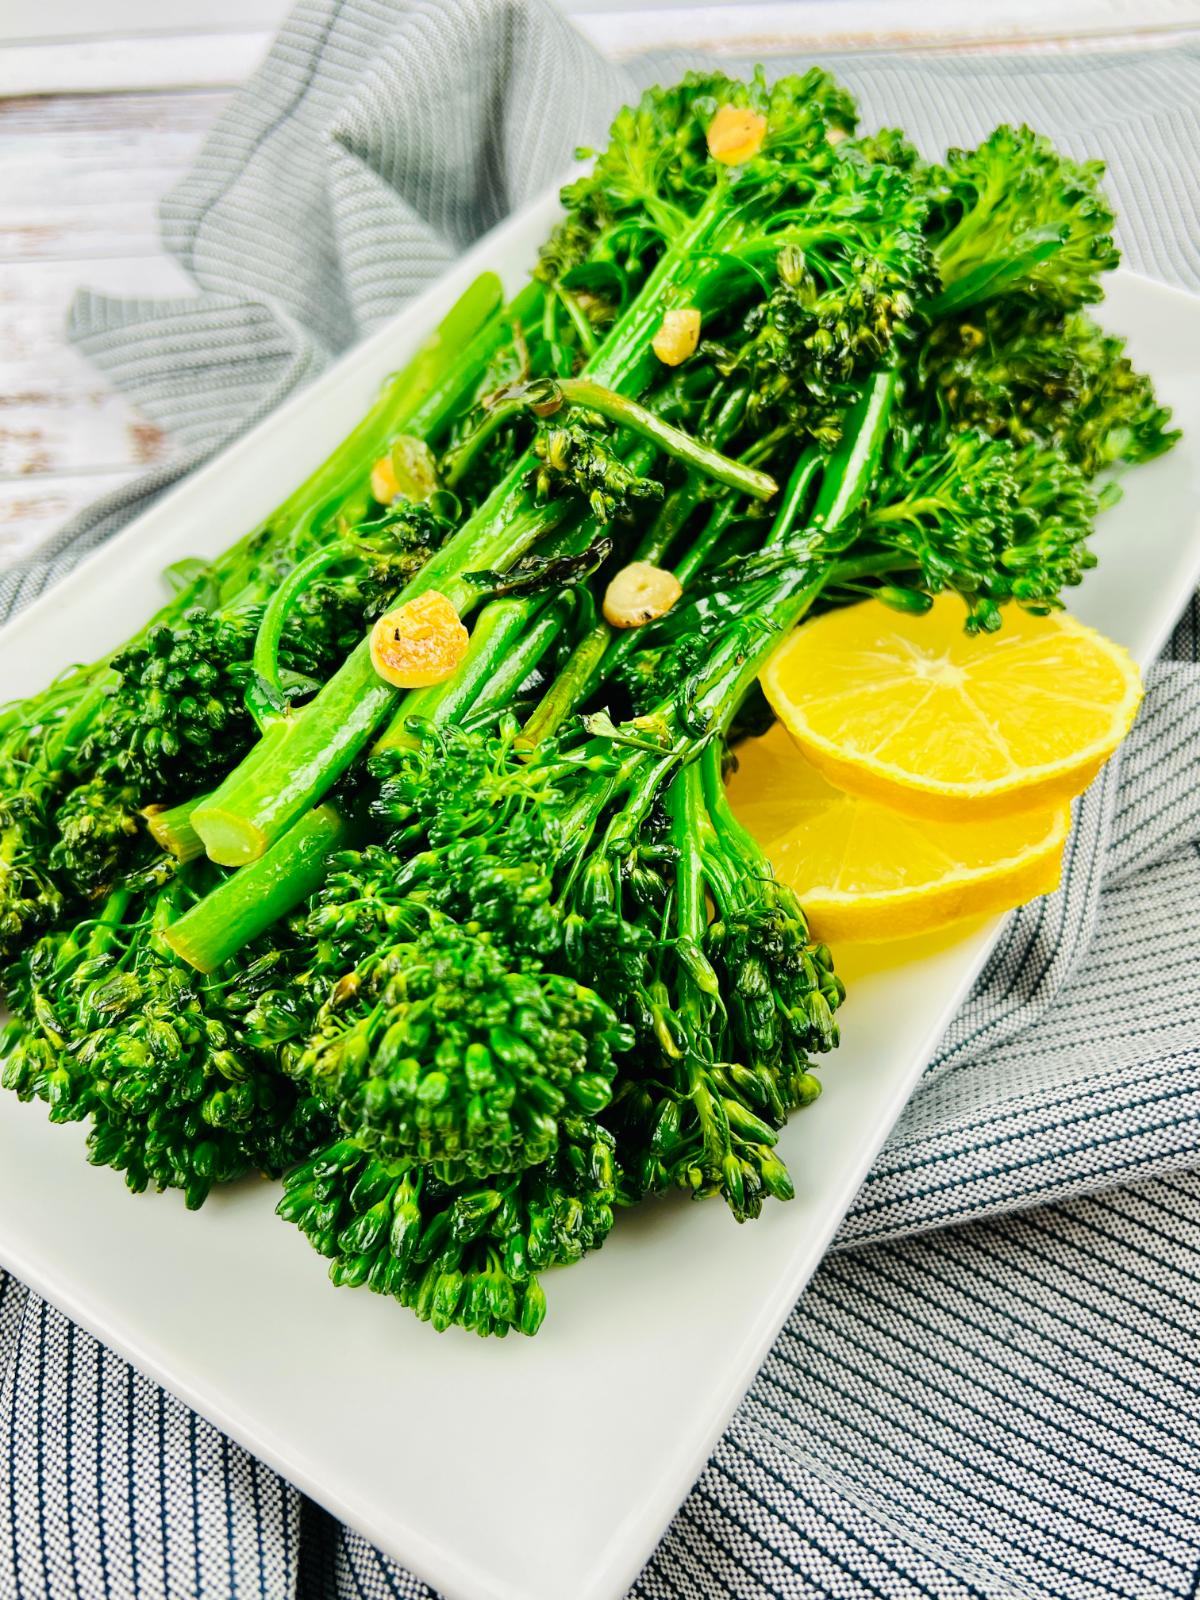 A plate of cooked Tenderstem broccoli garnished with lemon slices.